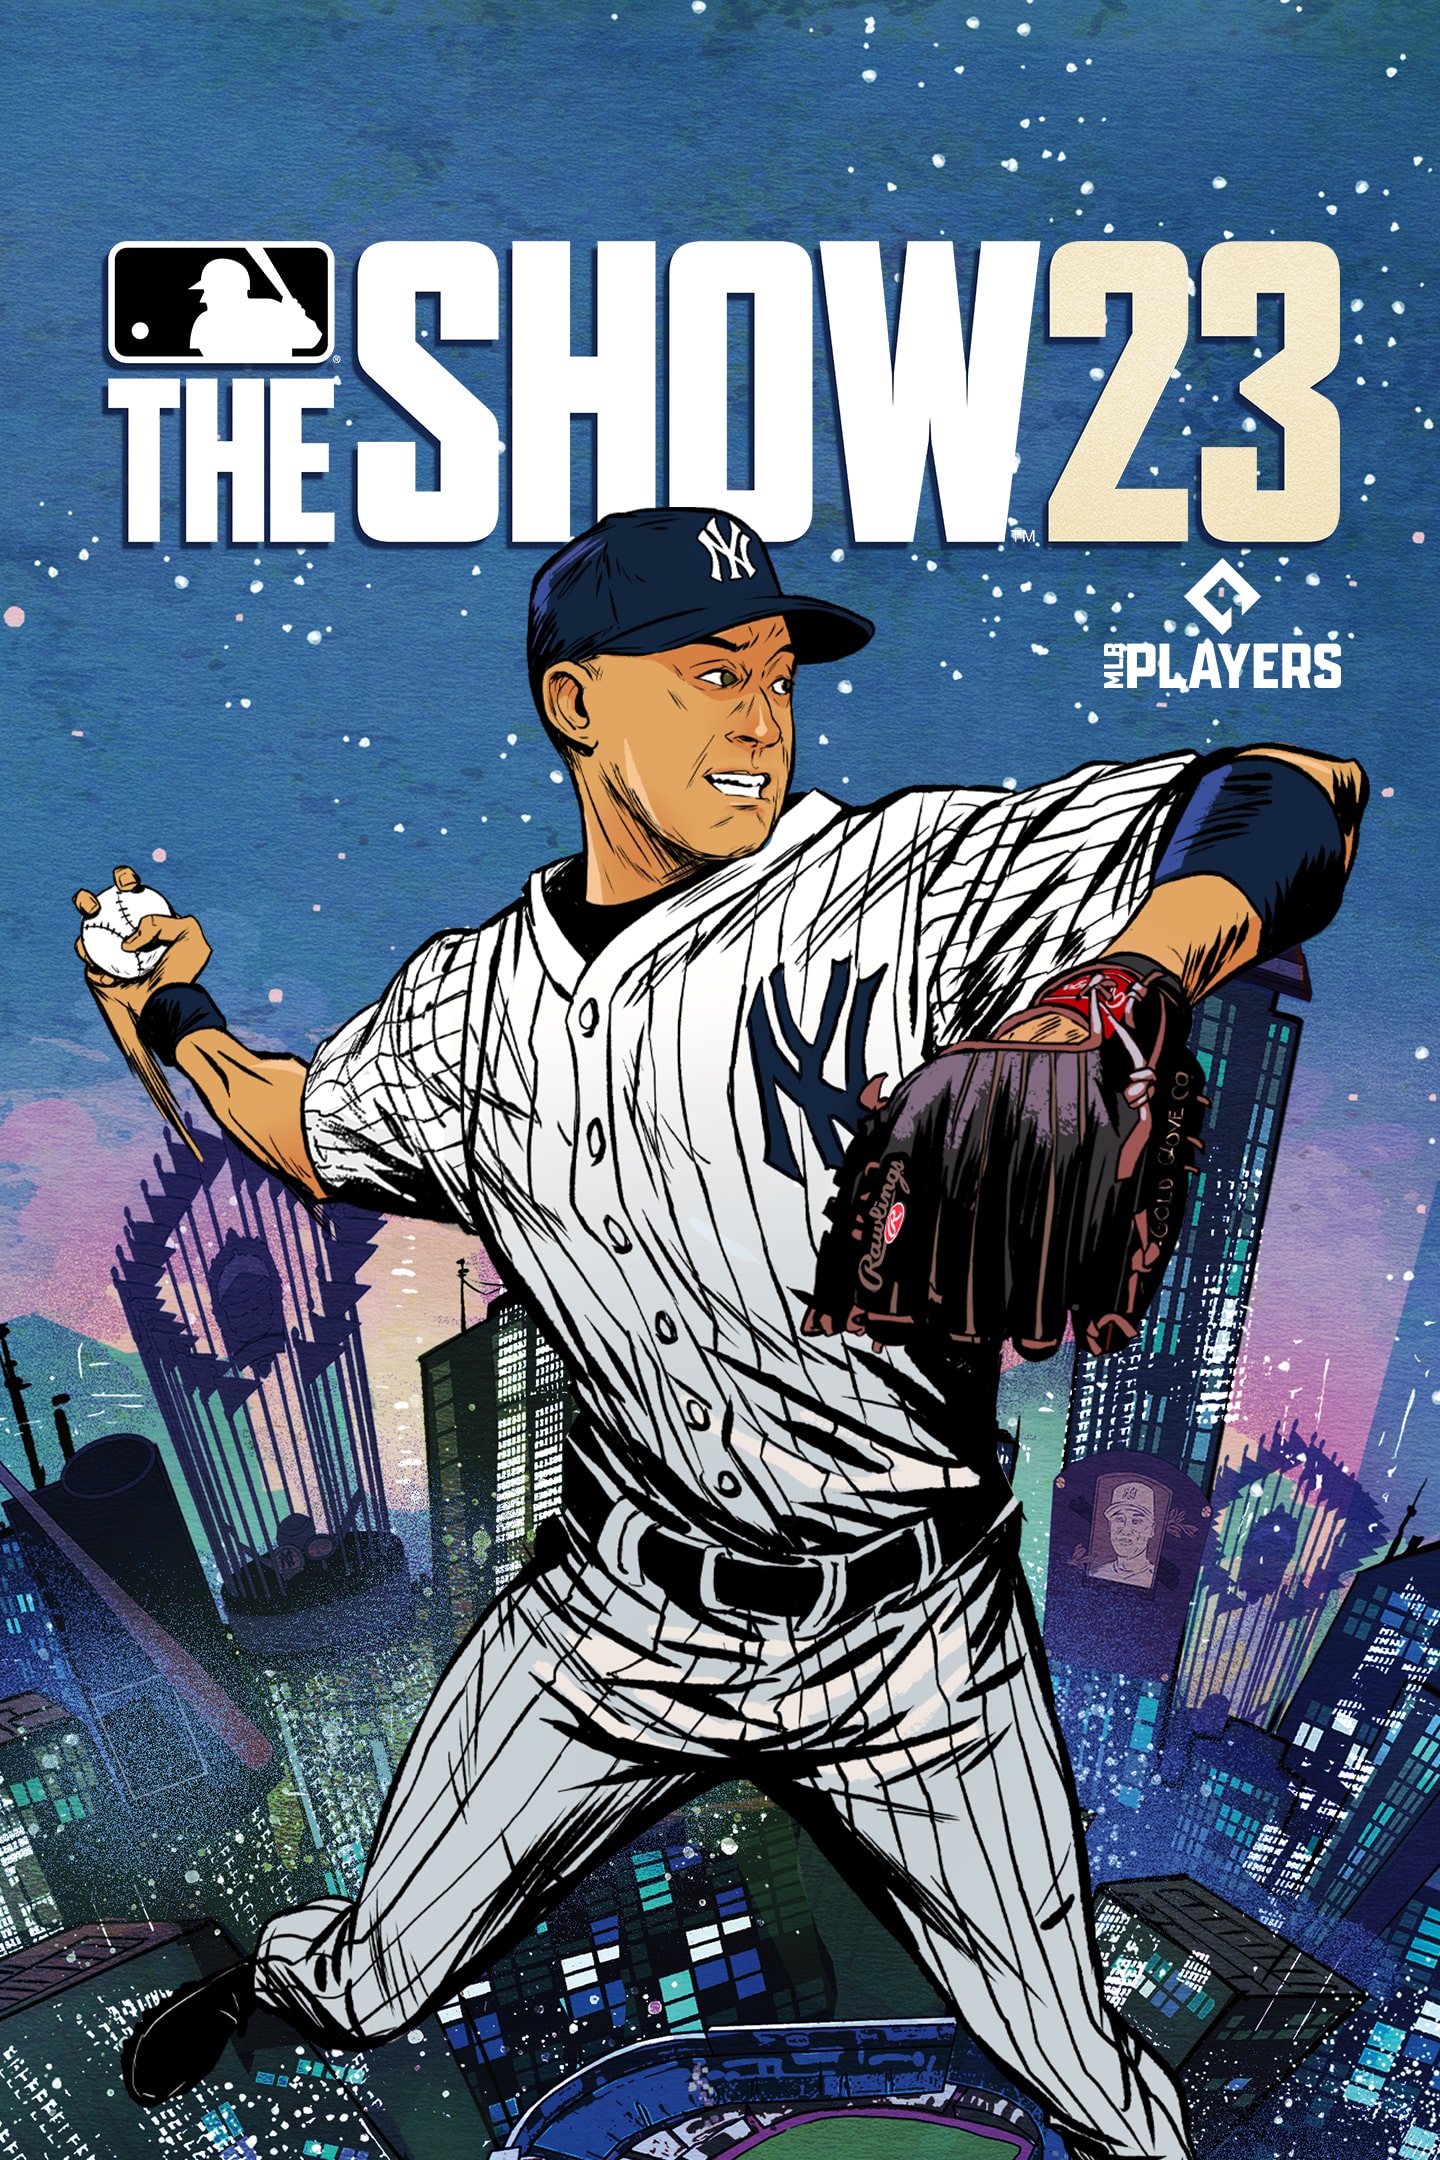 MLB The Show 23 - PlayStation 4 